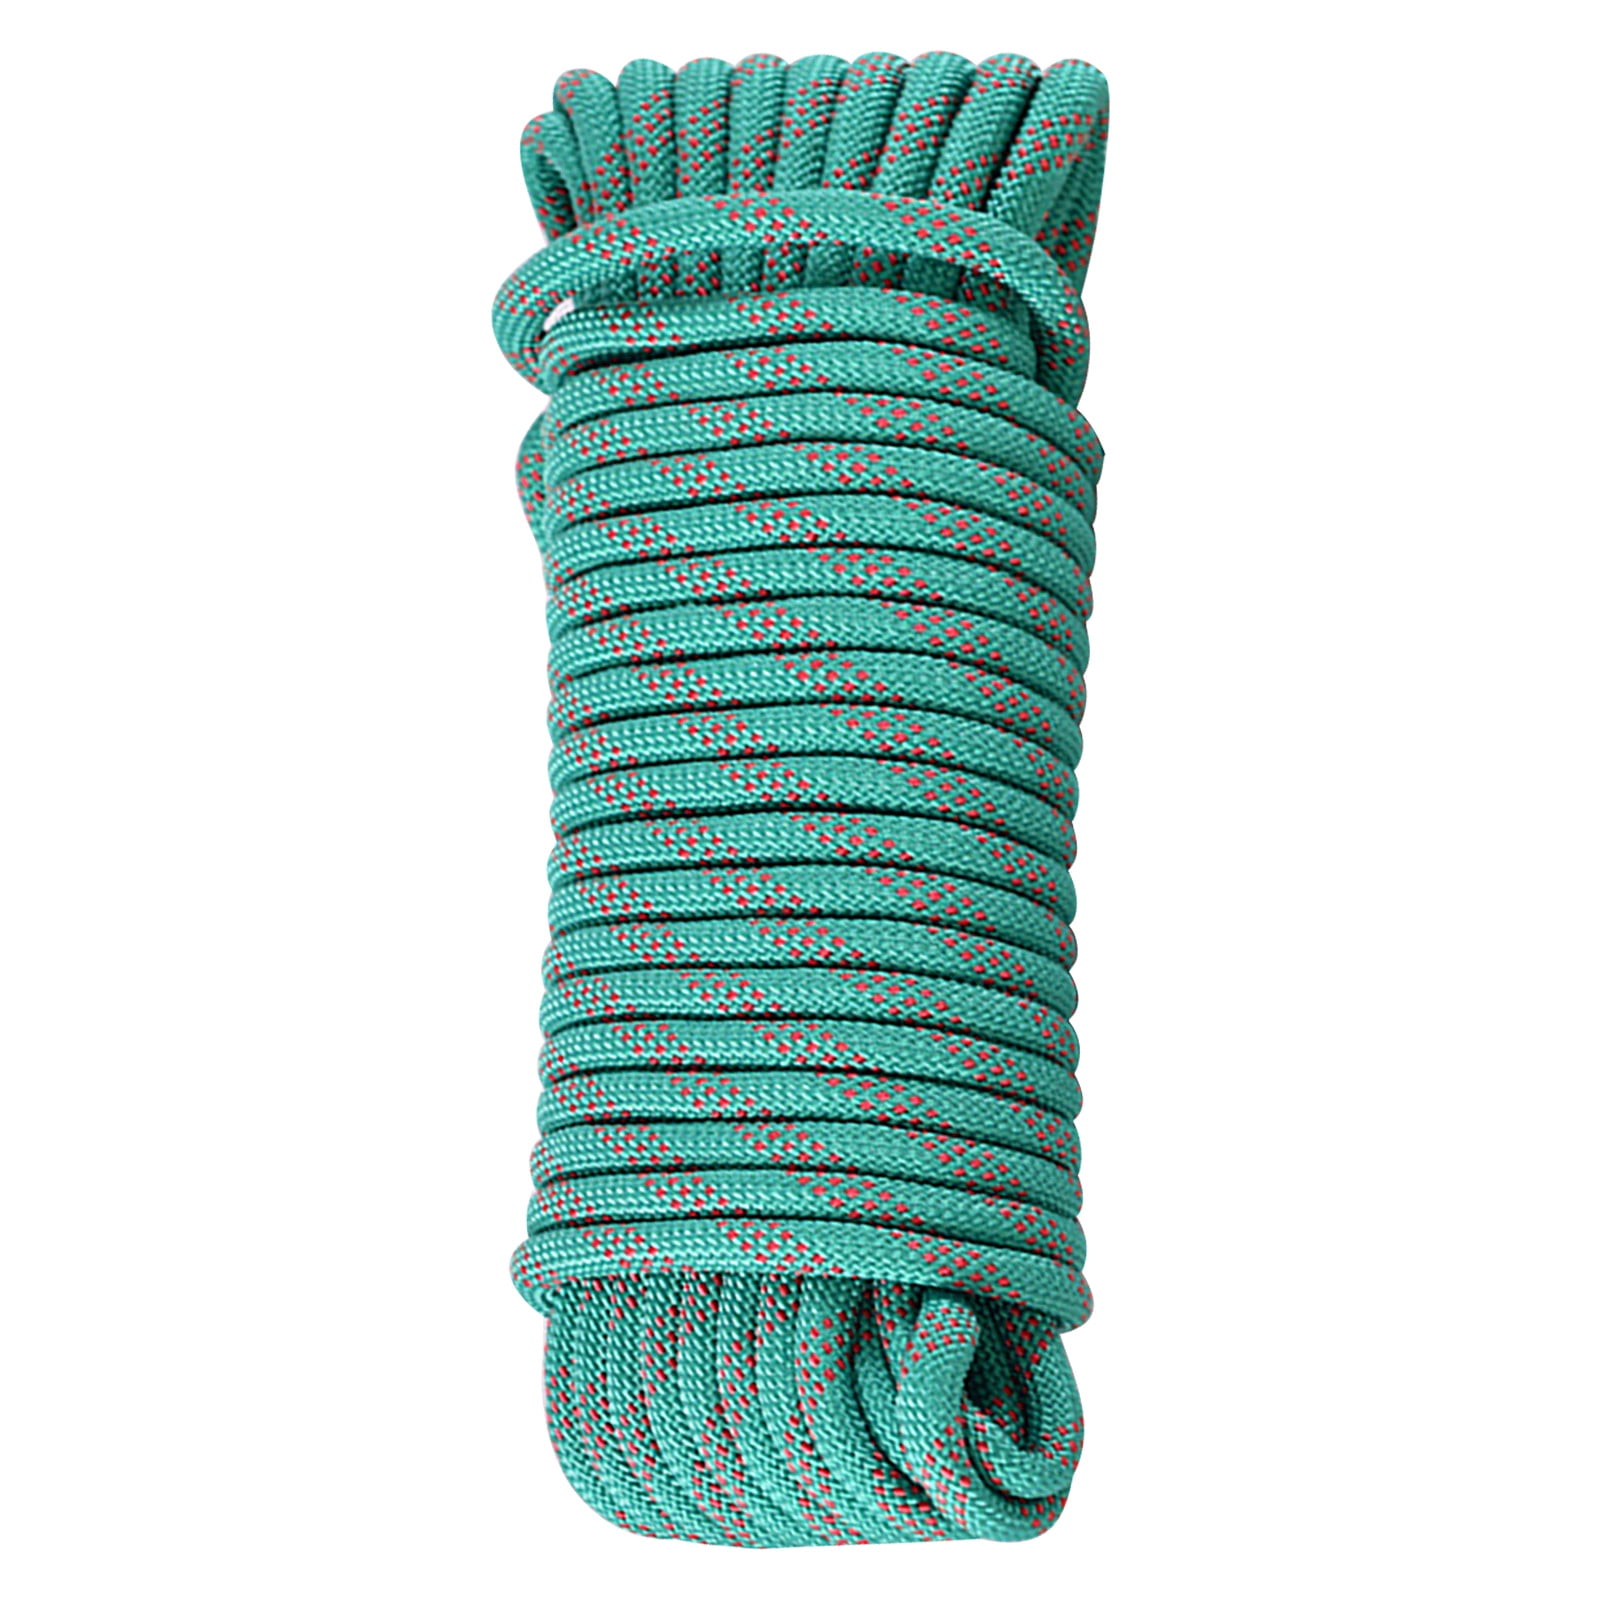 4 mm 100 Meters Polypropylene Braided Poly Rope Boat,Camping,Yacht,Sailing 